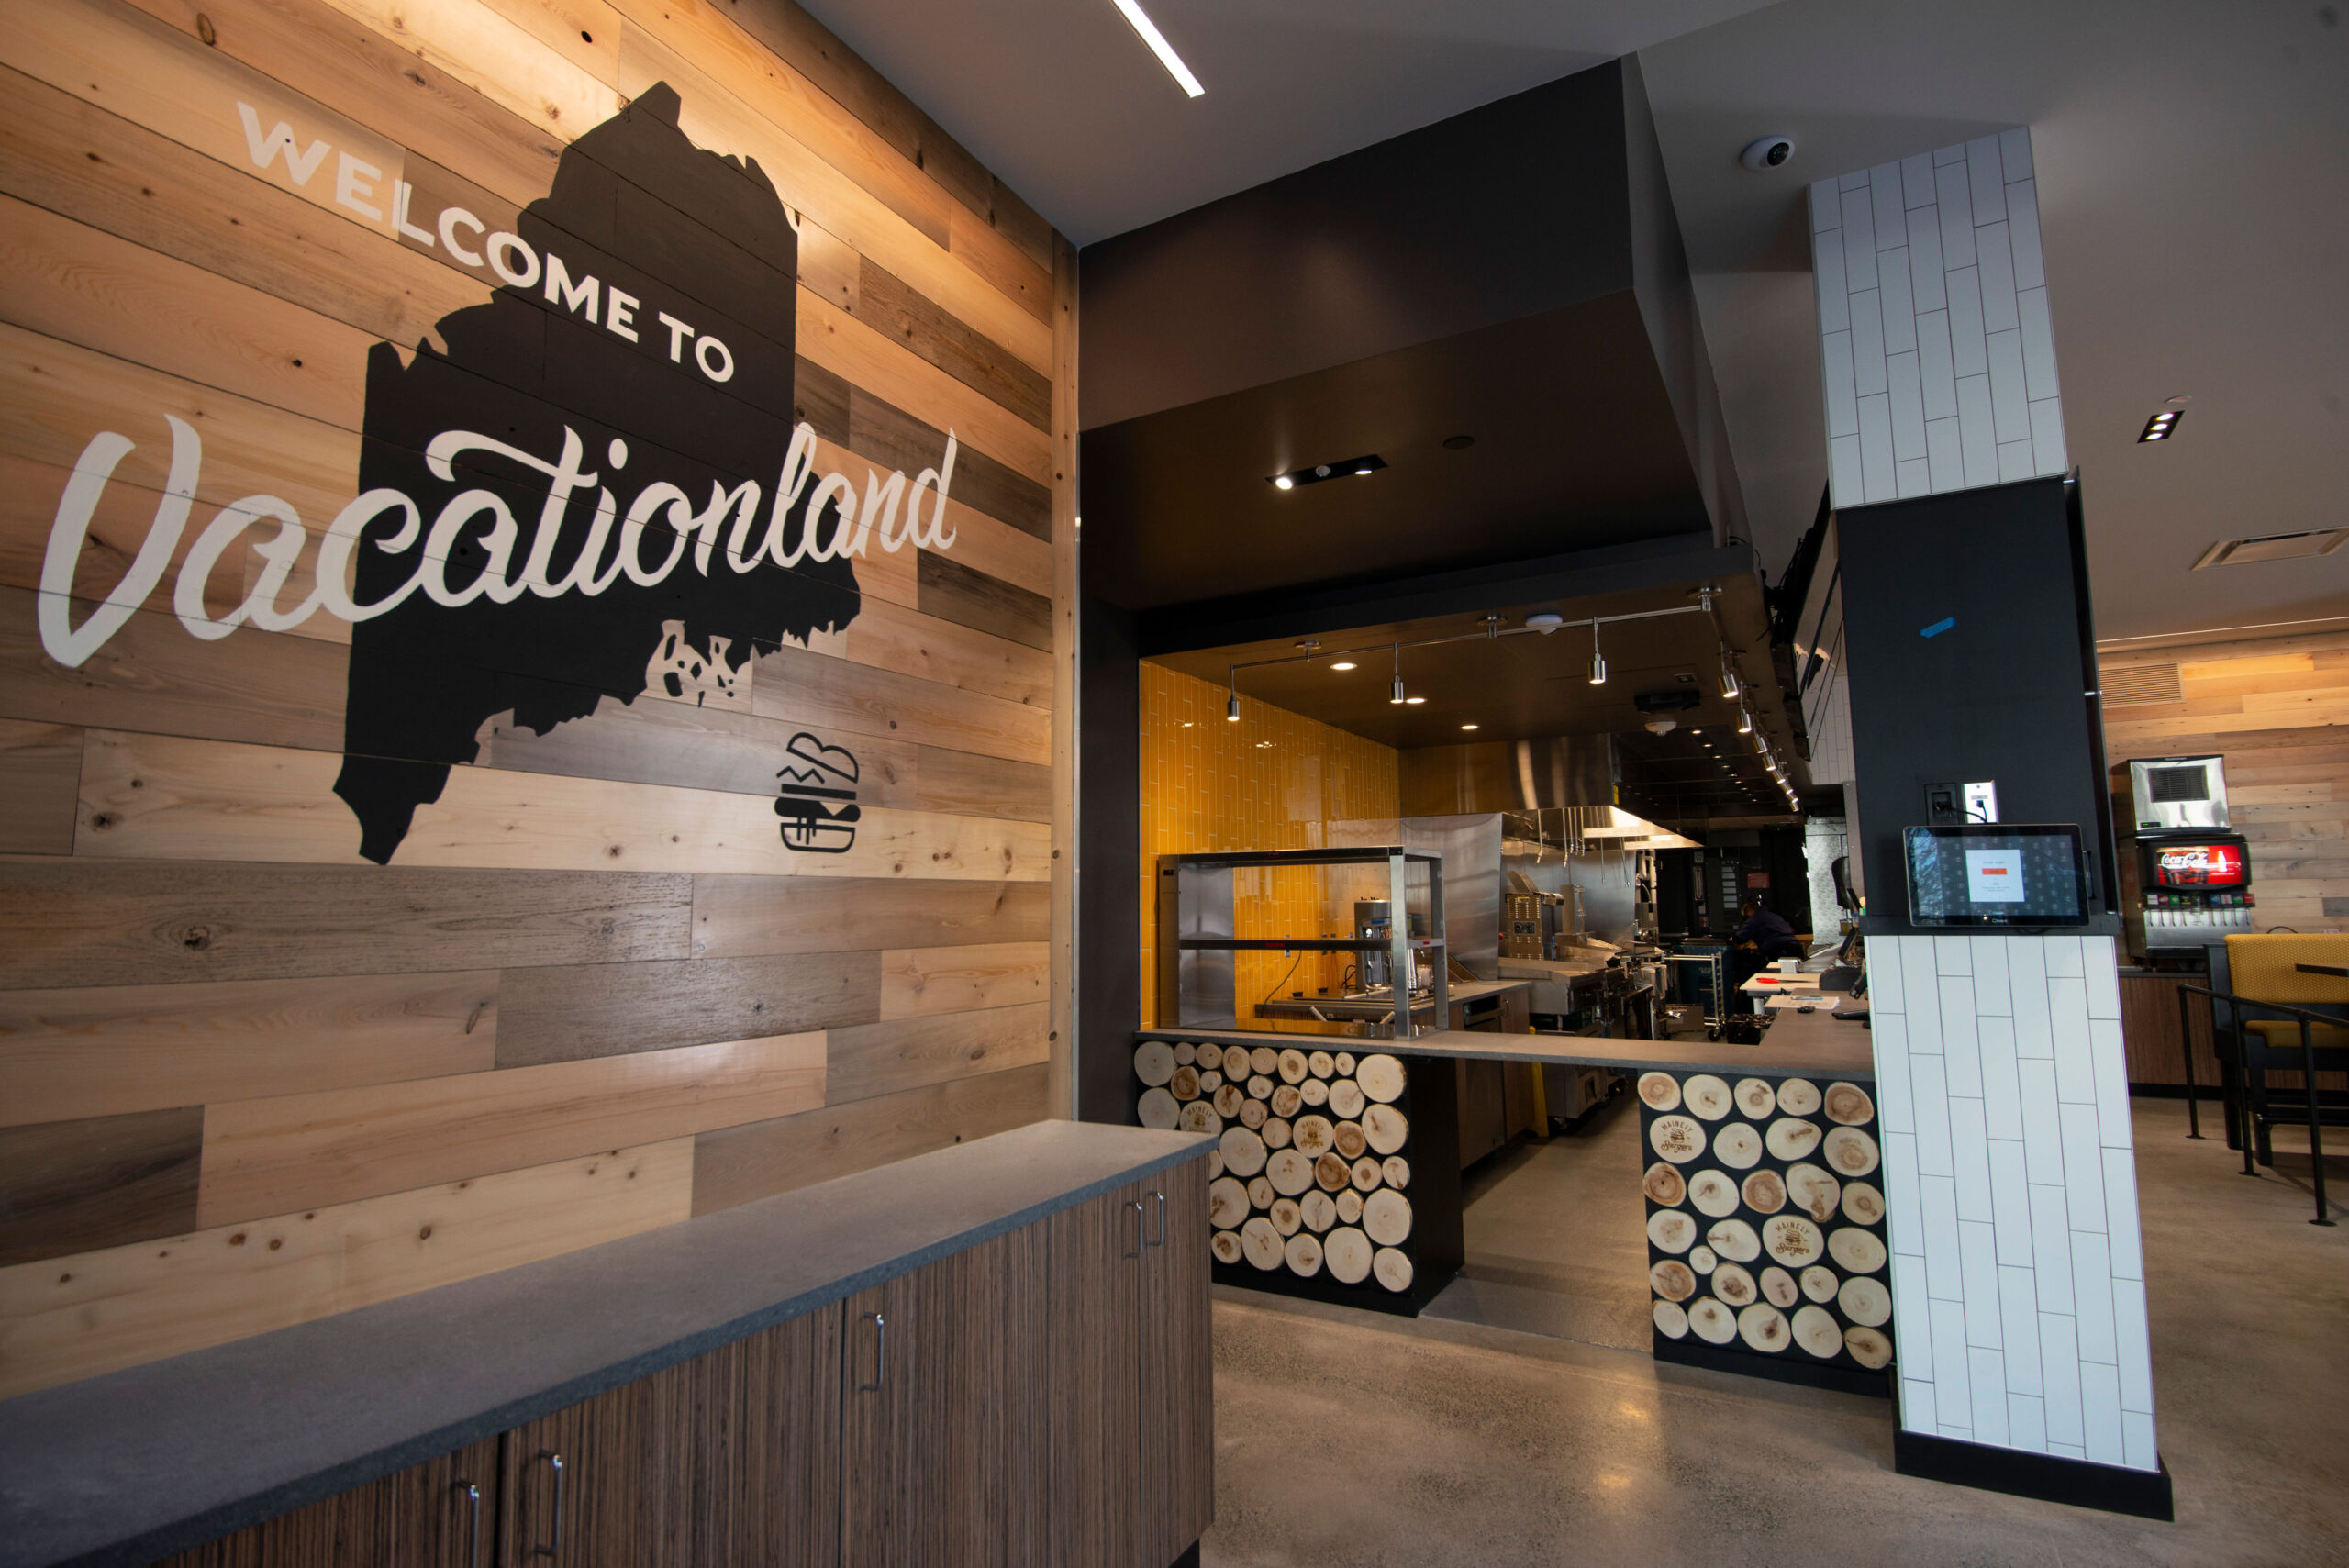 Fast Causal Burger Restaurant Interior Design with wood wall featuring state image and logo